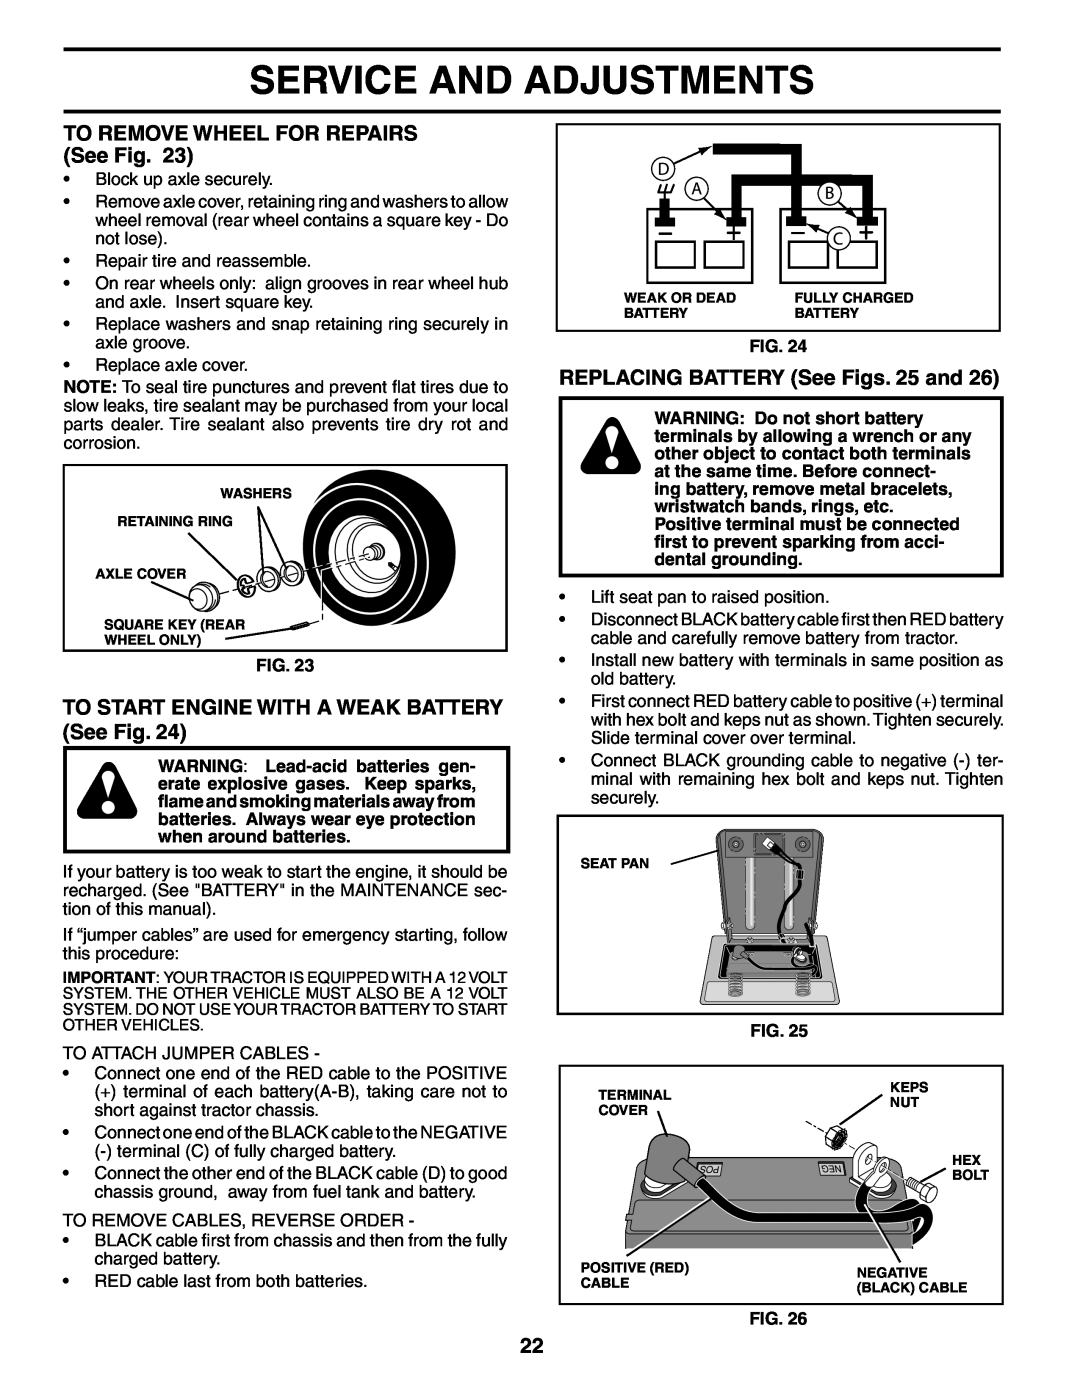 Weed Eater 187637 manual TO REMOVE WHEEL FOR REPAIRS See Fig, TO START ENGINE WITH A WEAK BATTERY See Fig 